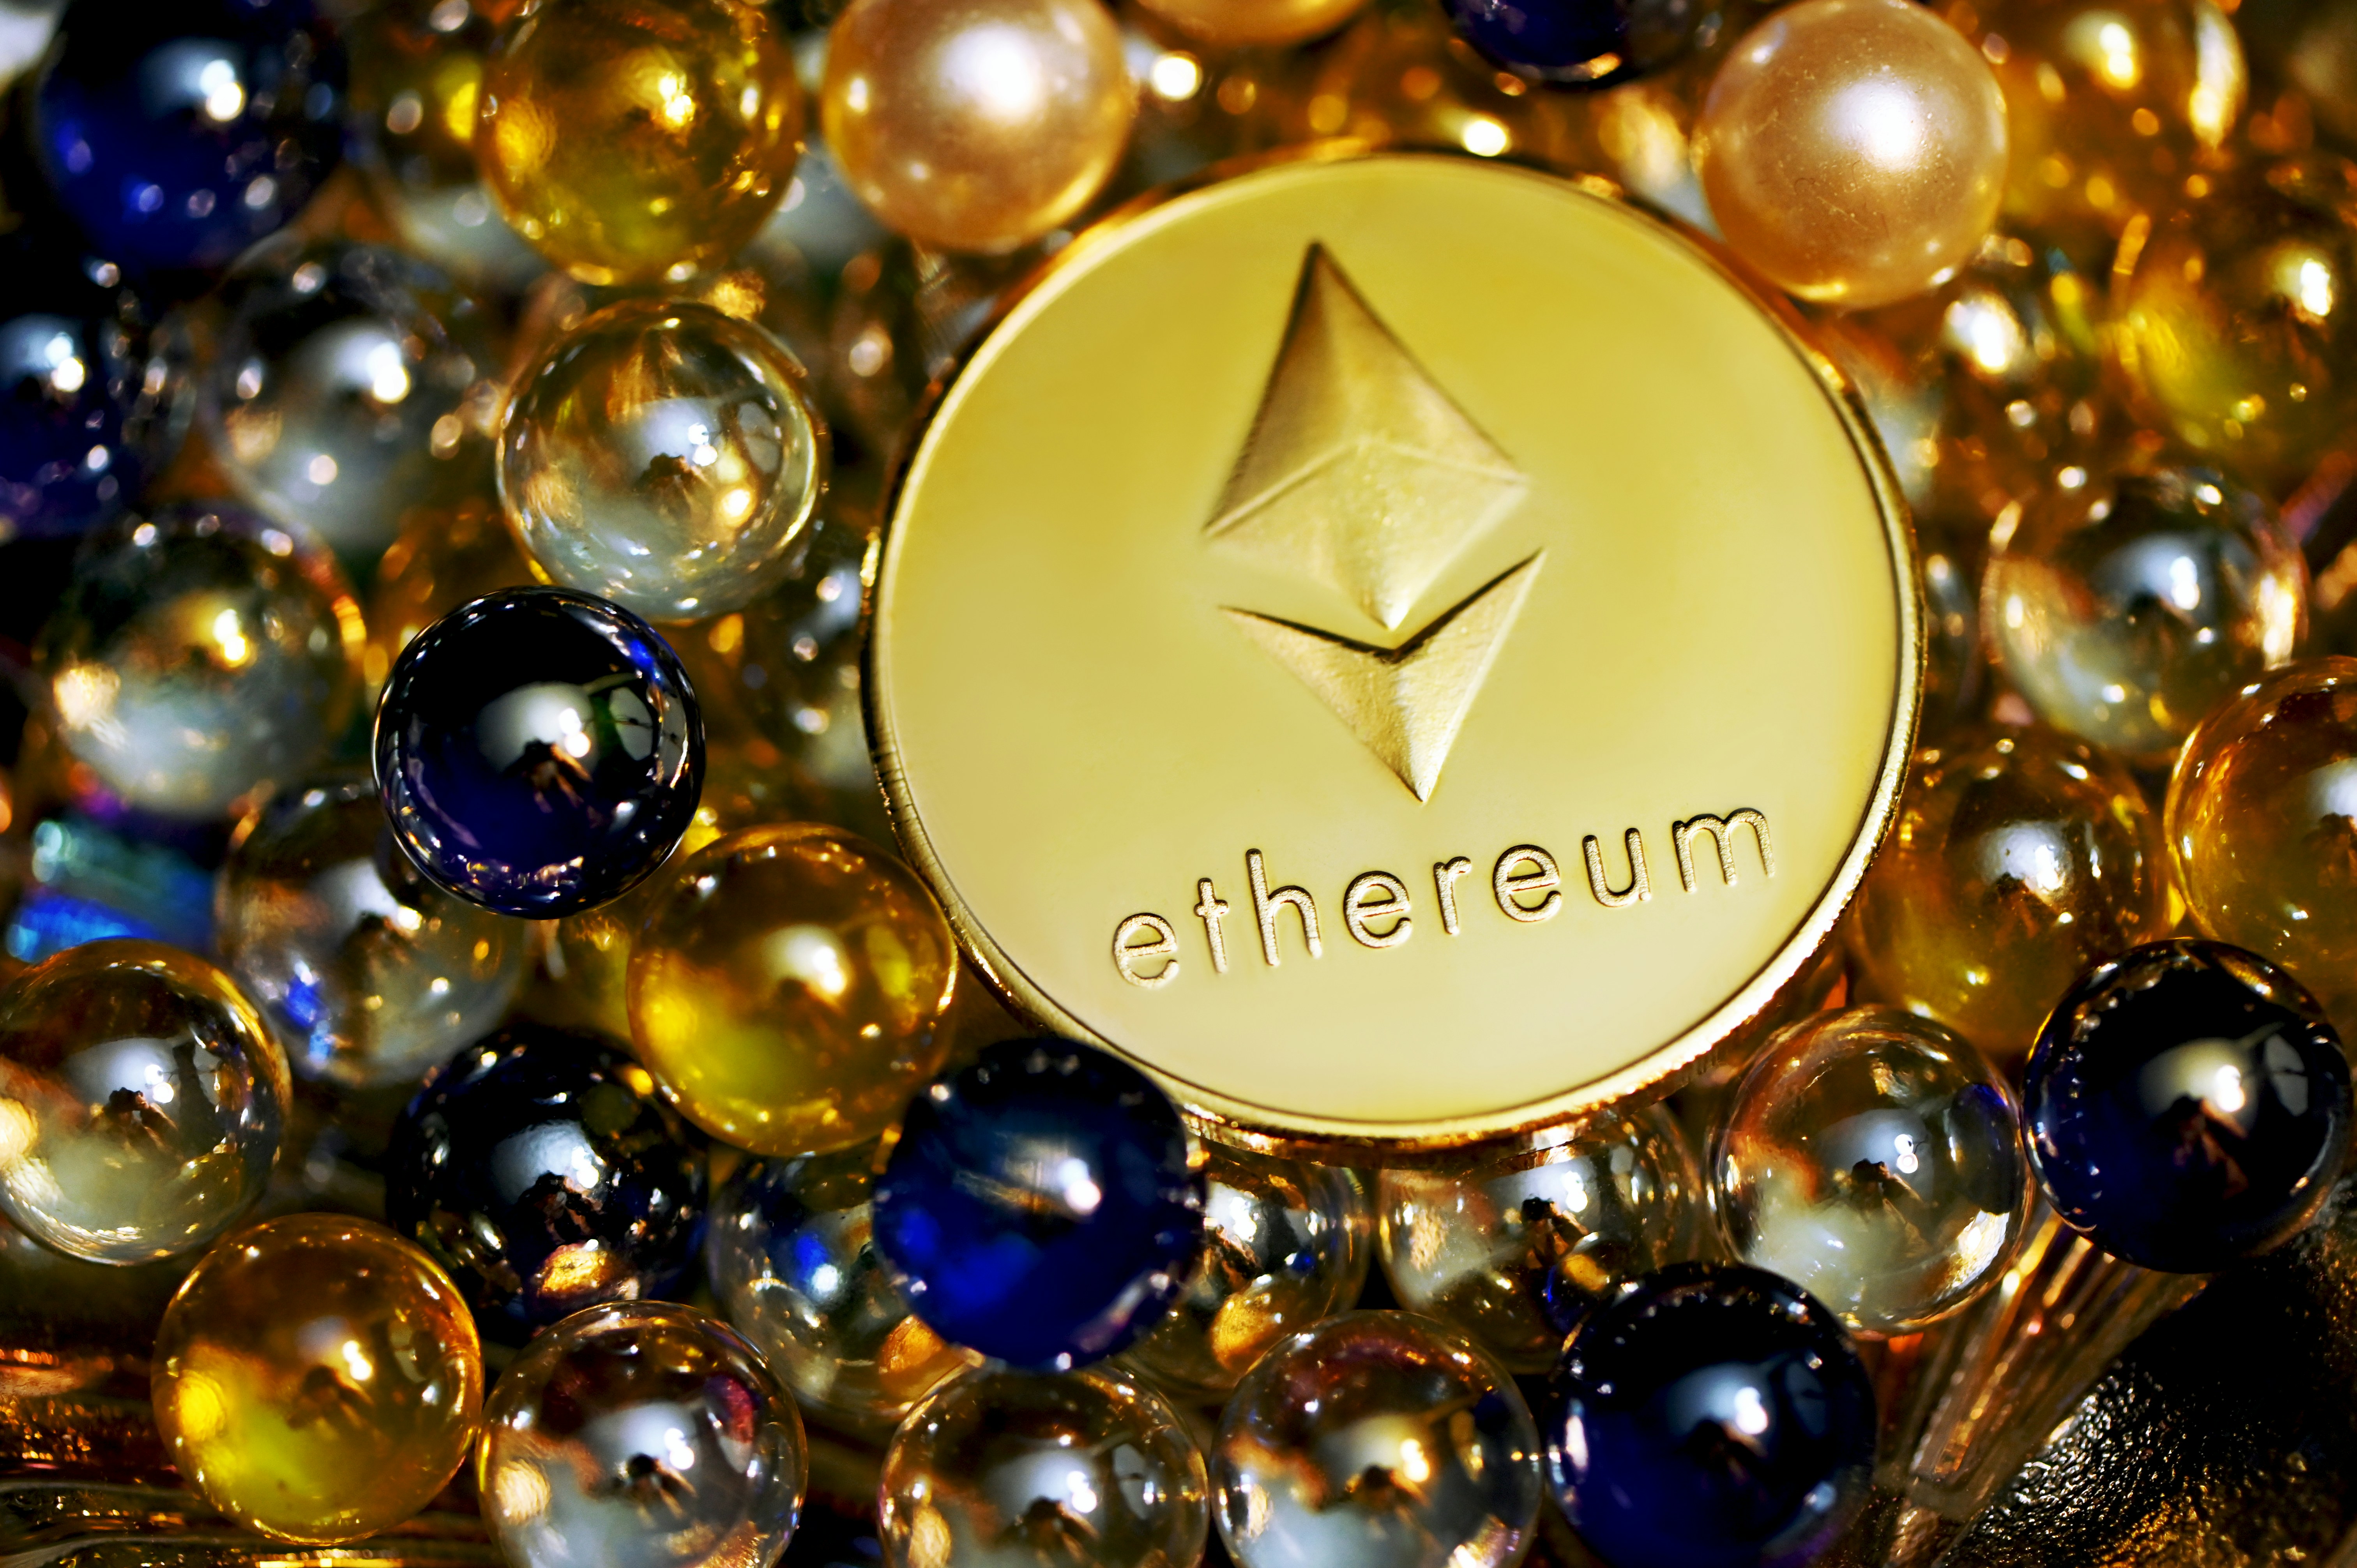 Ethereum coin on top of the crystals